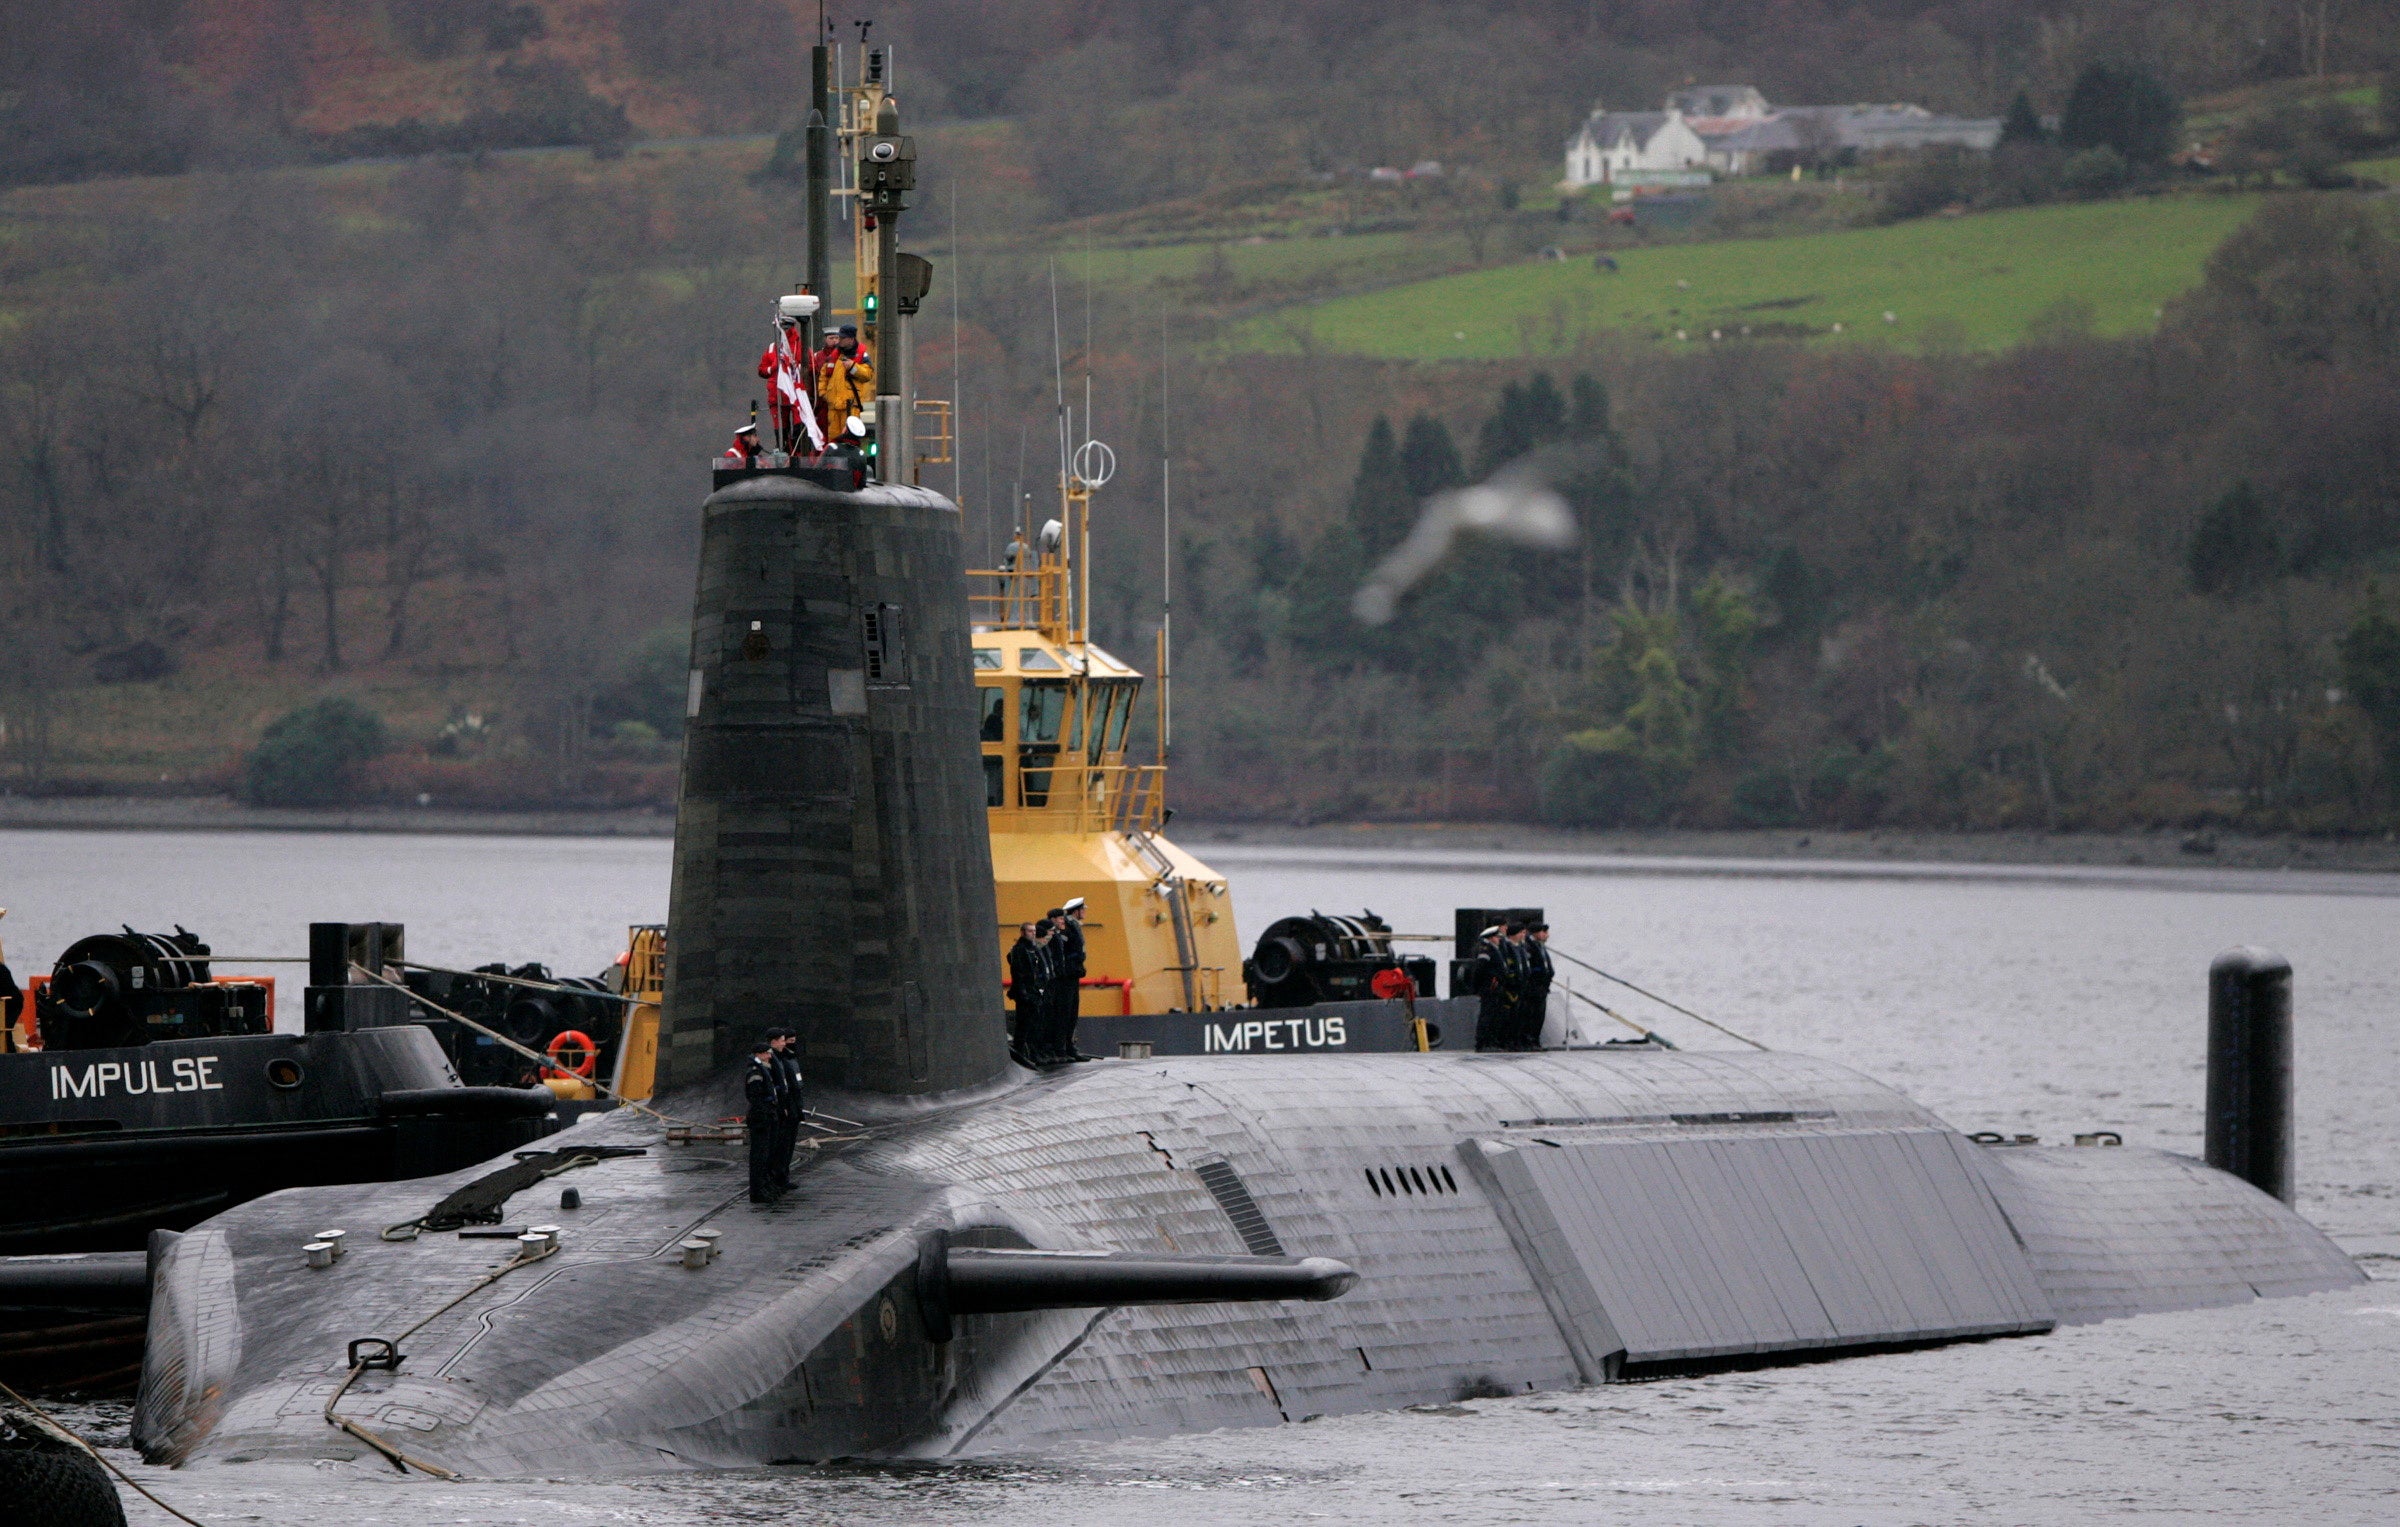 The present system is operated by four Vanguard-class submarines and costs around £3bn a year to maintain